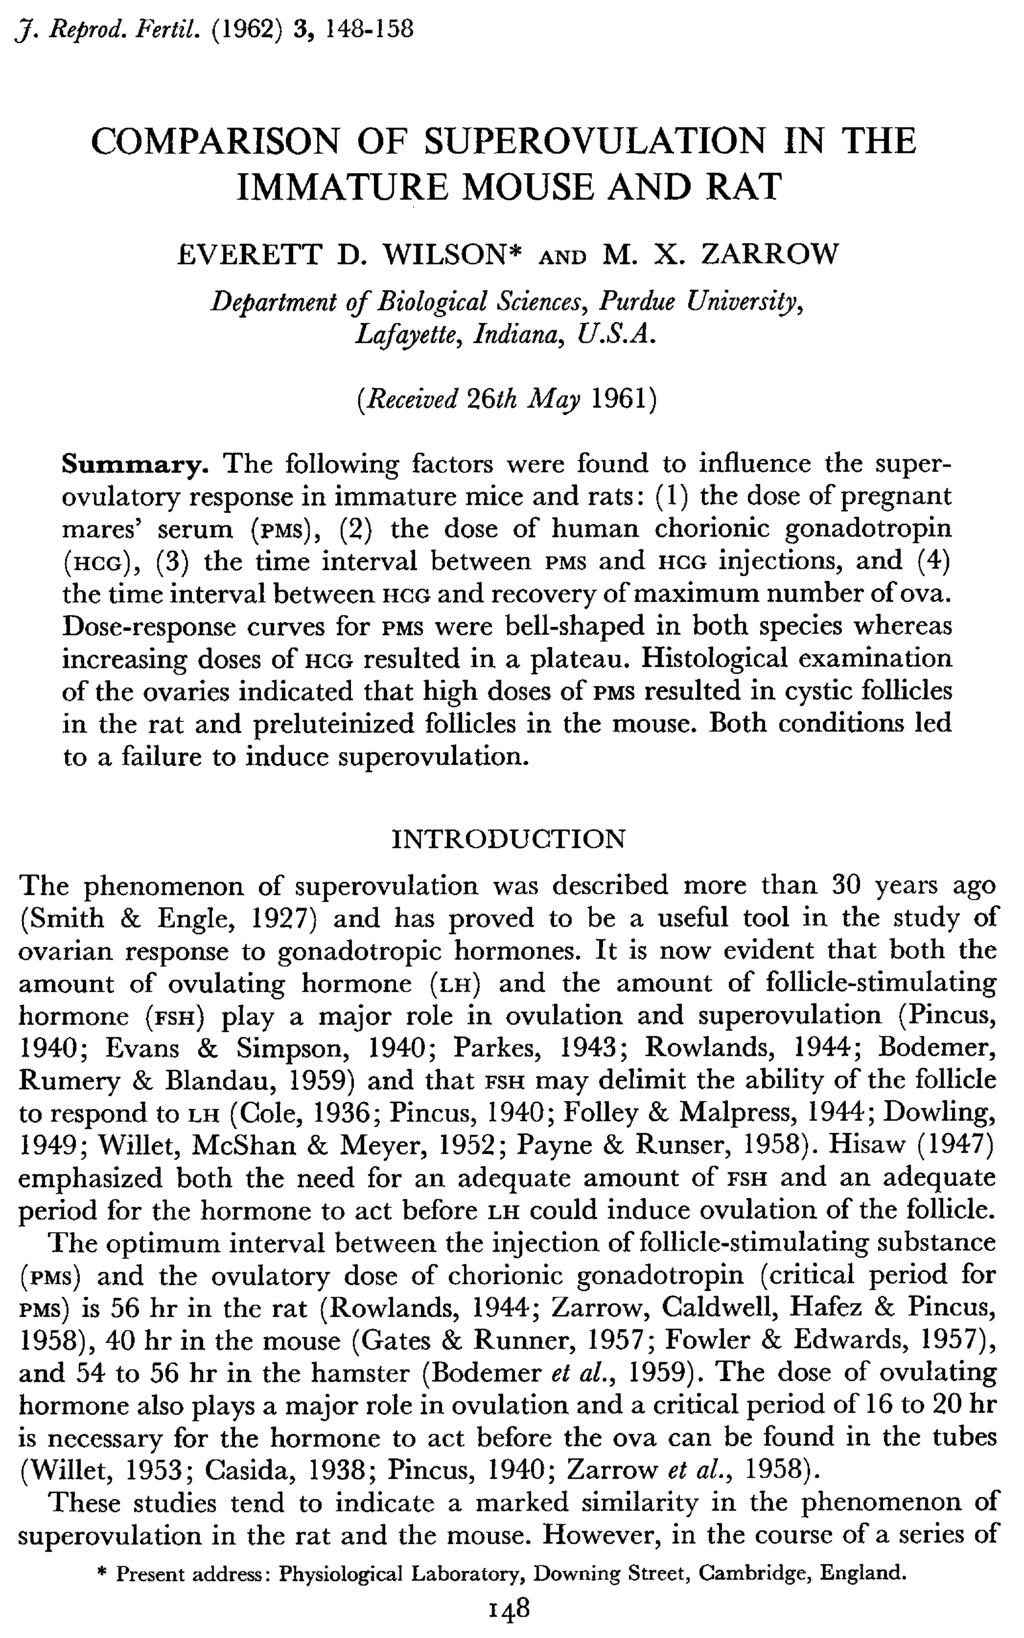 COMPARISON OF SUPEROVULATION IN THE IMMATURE MOUSE AND RAT EVERETT D. WILSON* and M. X. ZARROW Department of Biological Sciences, Purdue University, Lafayette, Indiana, U.S.A. (Received 26th May 1961) Summary.